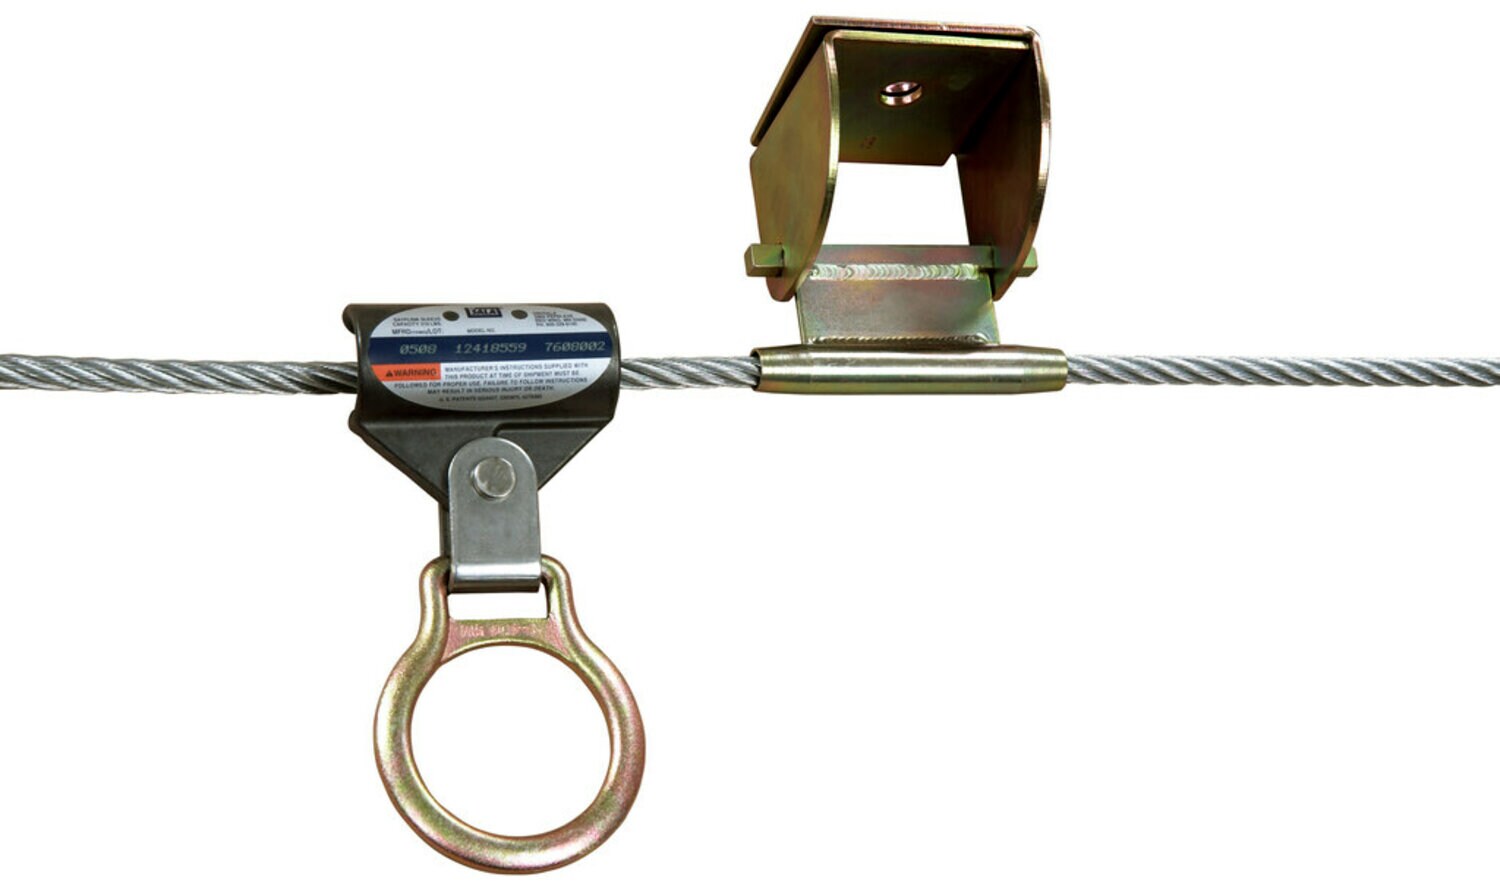 7012820325 - 3M DBI-SALA Permanent Multi-Span Horizontal Lifeline System 7603073, Stainless Steel Cable, 20 ft